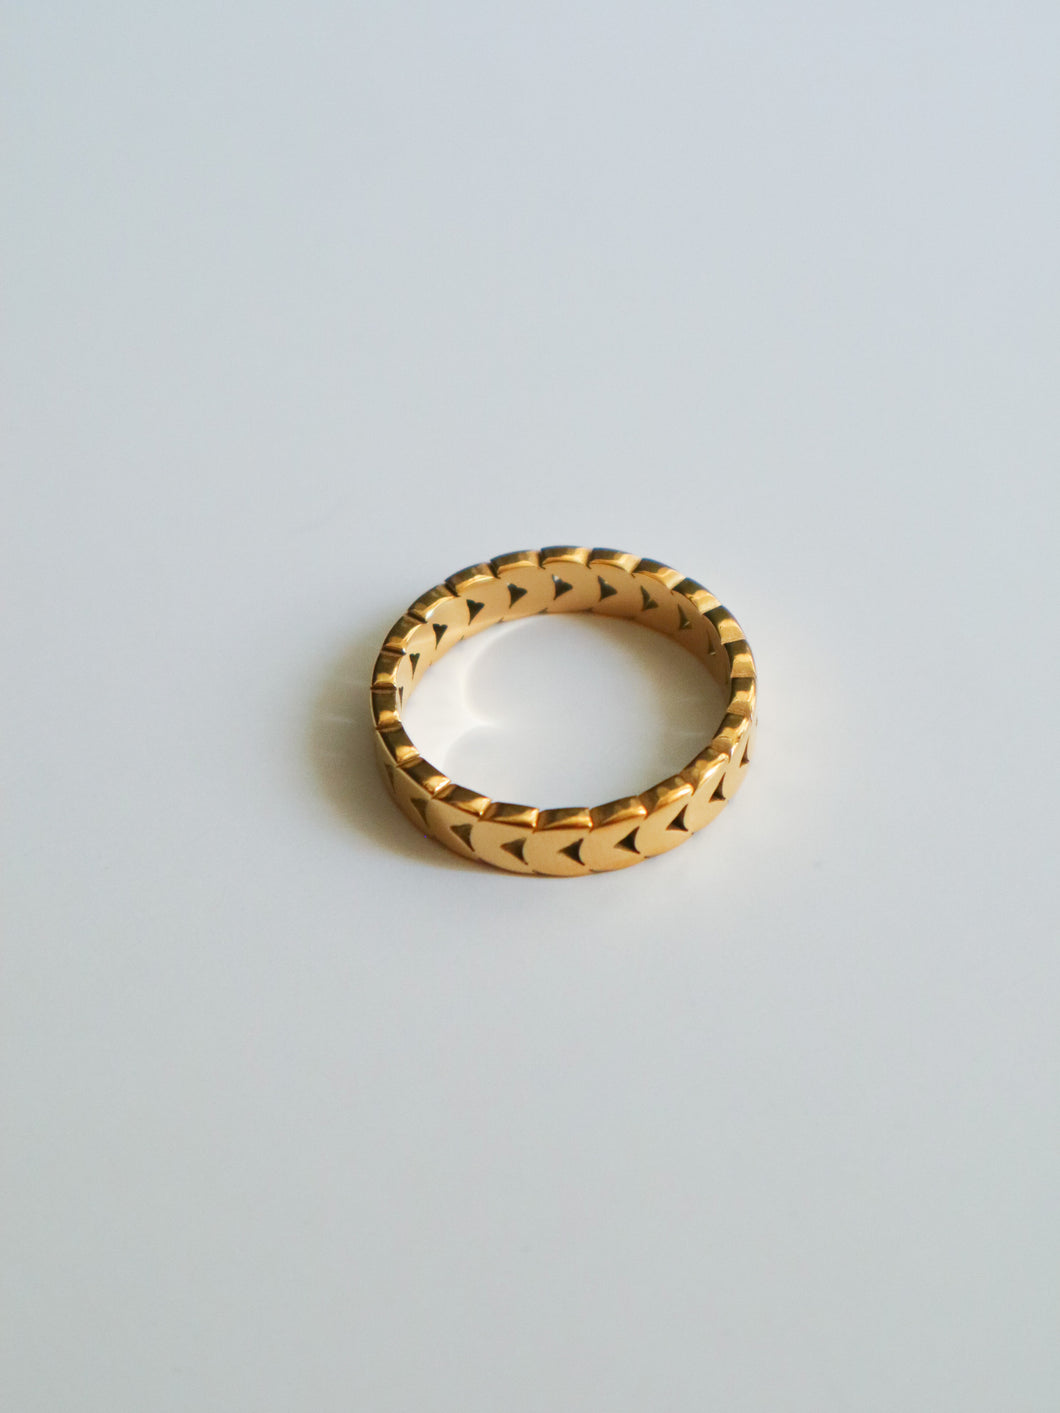 Gold Triangle Ring